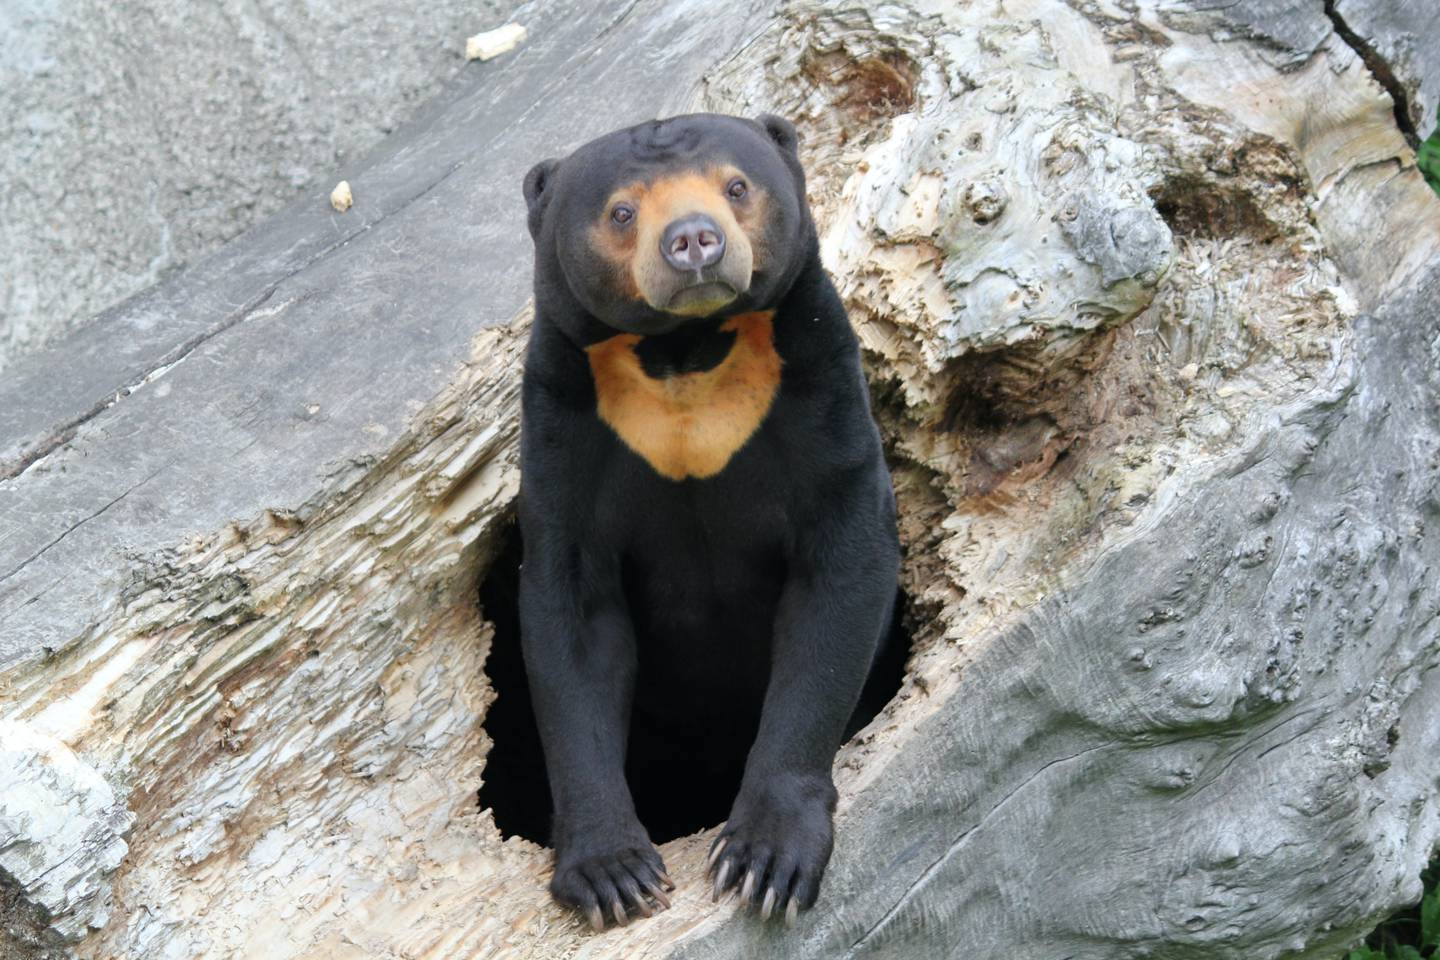 Sun bears are only found in some parts of South-East Asia, and are now classified as 'vulnerable'. Unsplash